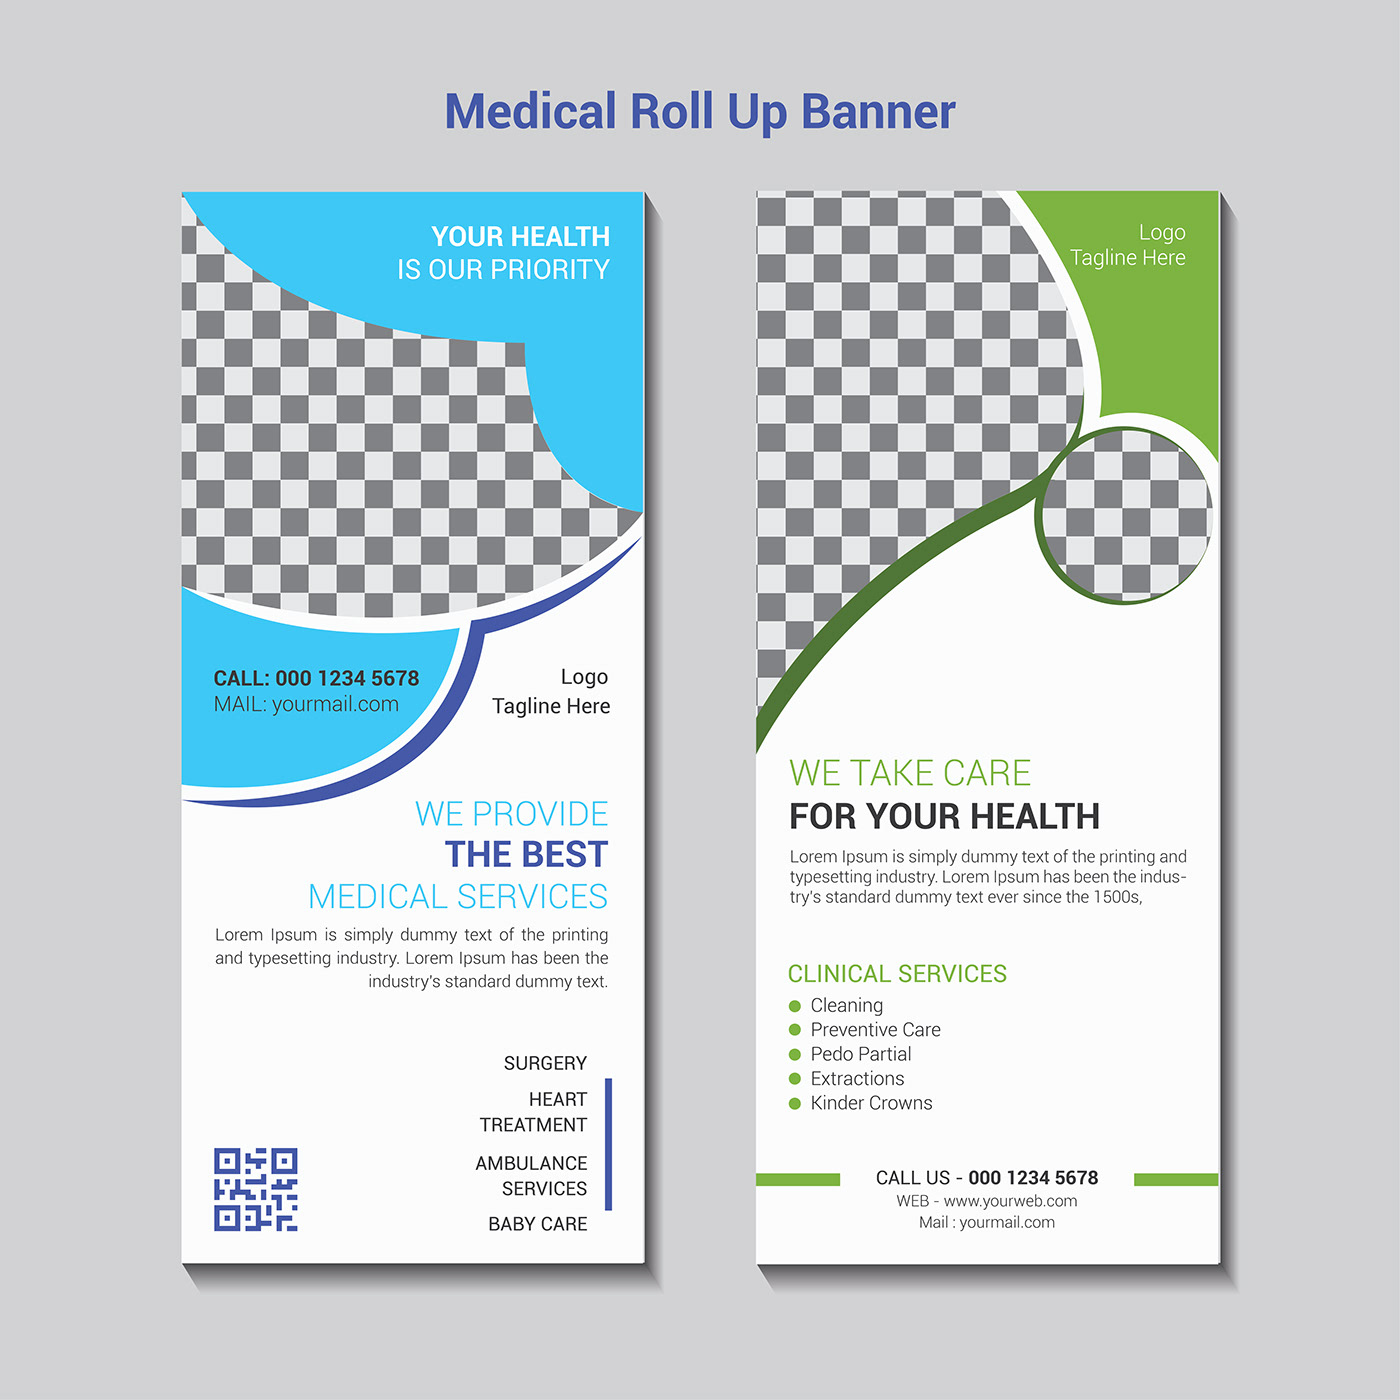 advertisement banner template billboard graphicdesign medical banner rollup rollupbanner Sigange stand banner 